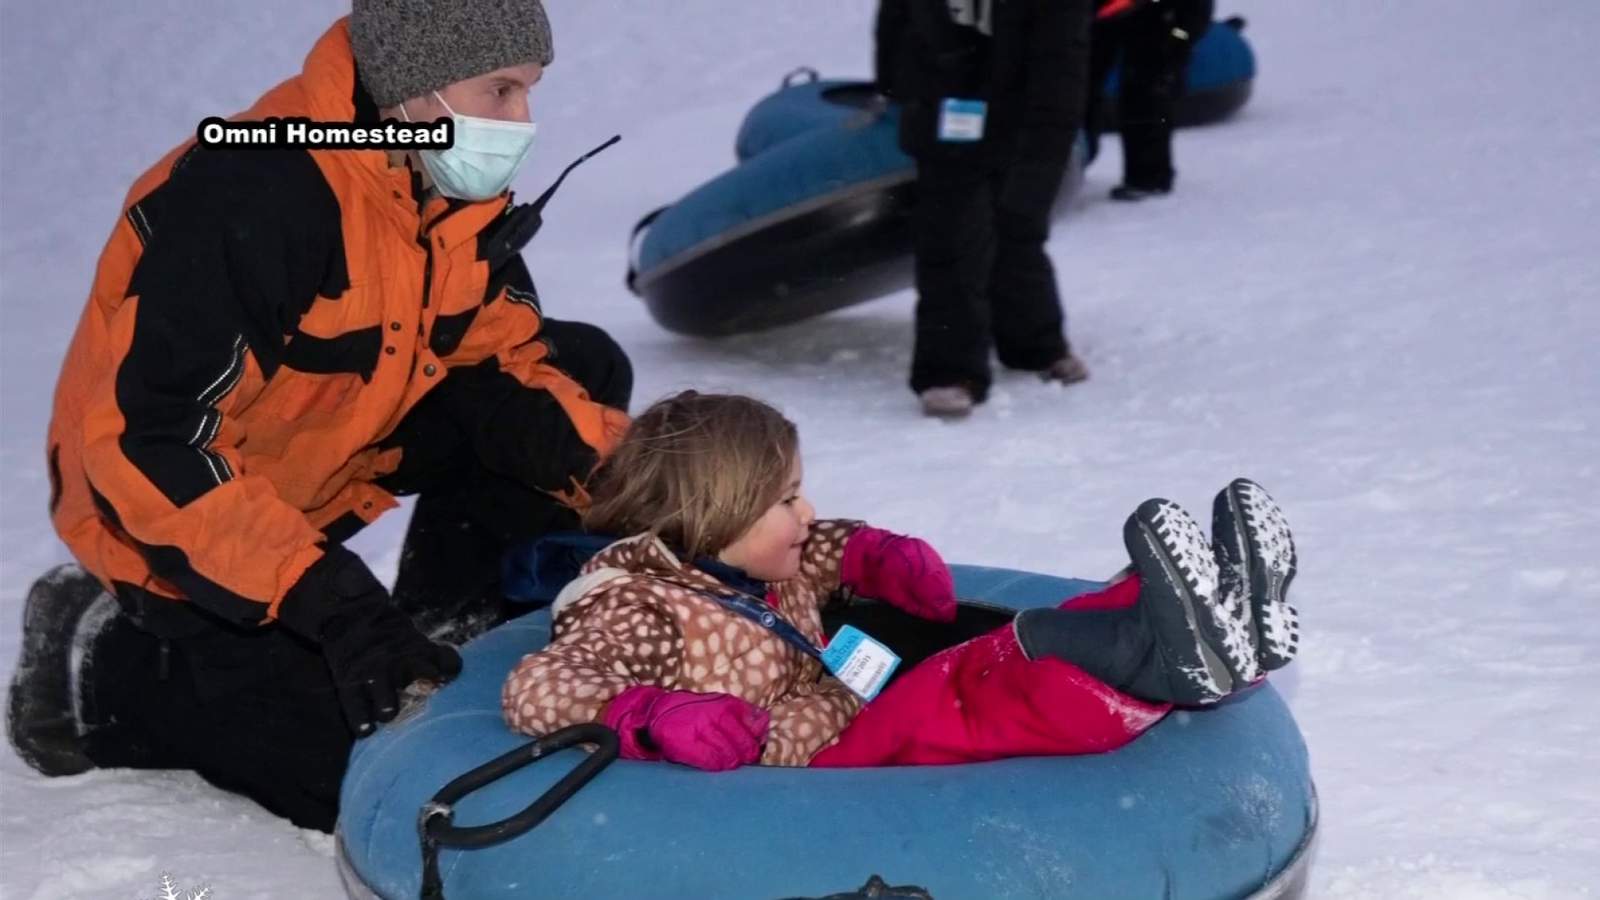 Omni Homestead allowing guests to go snow tubing after dark